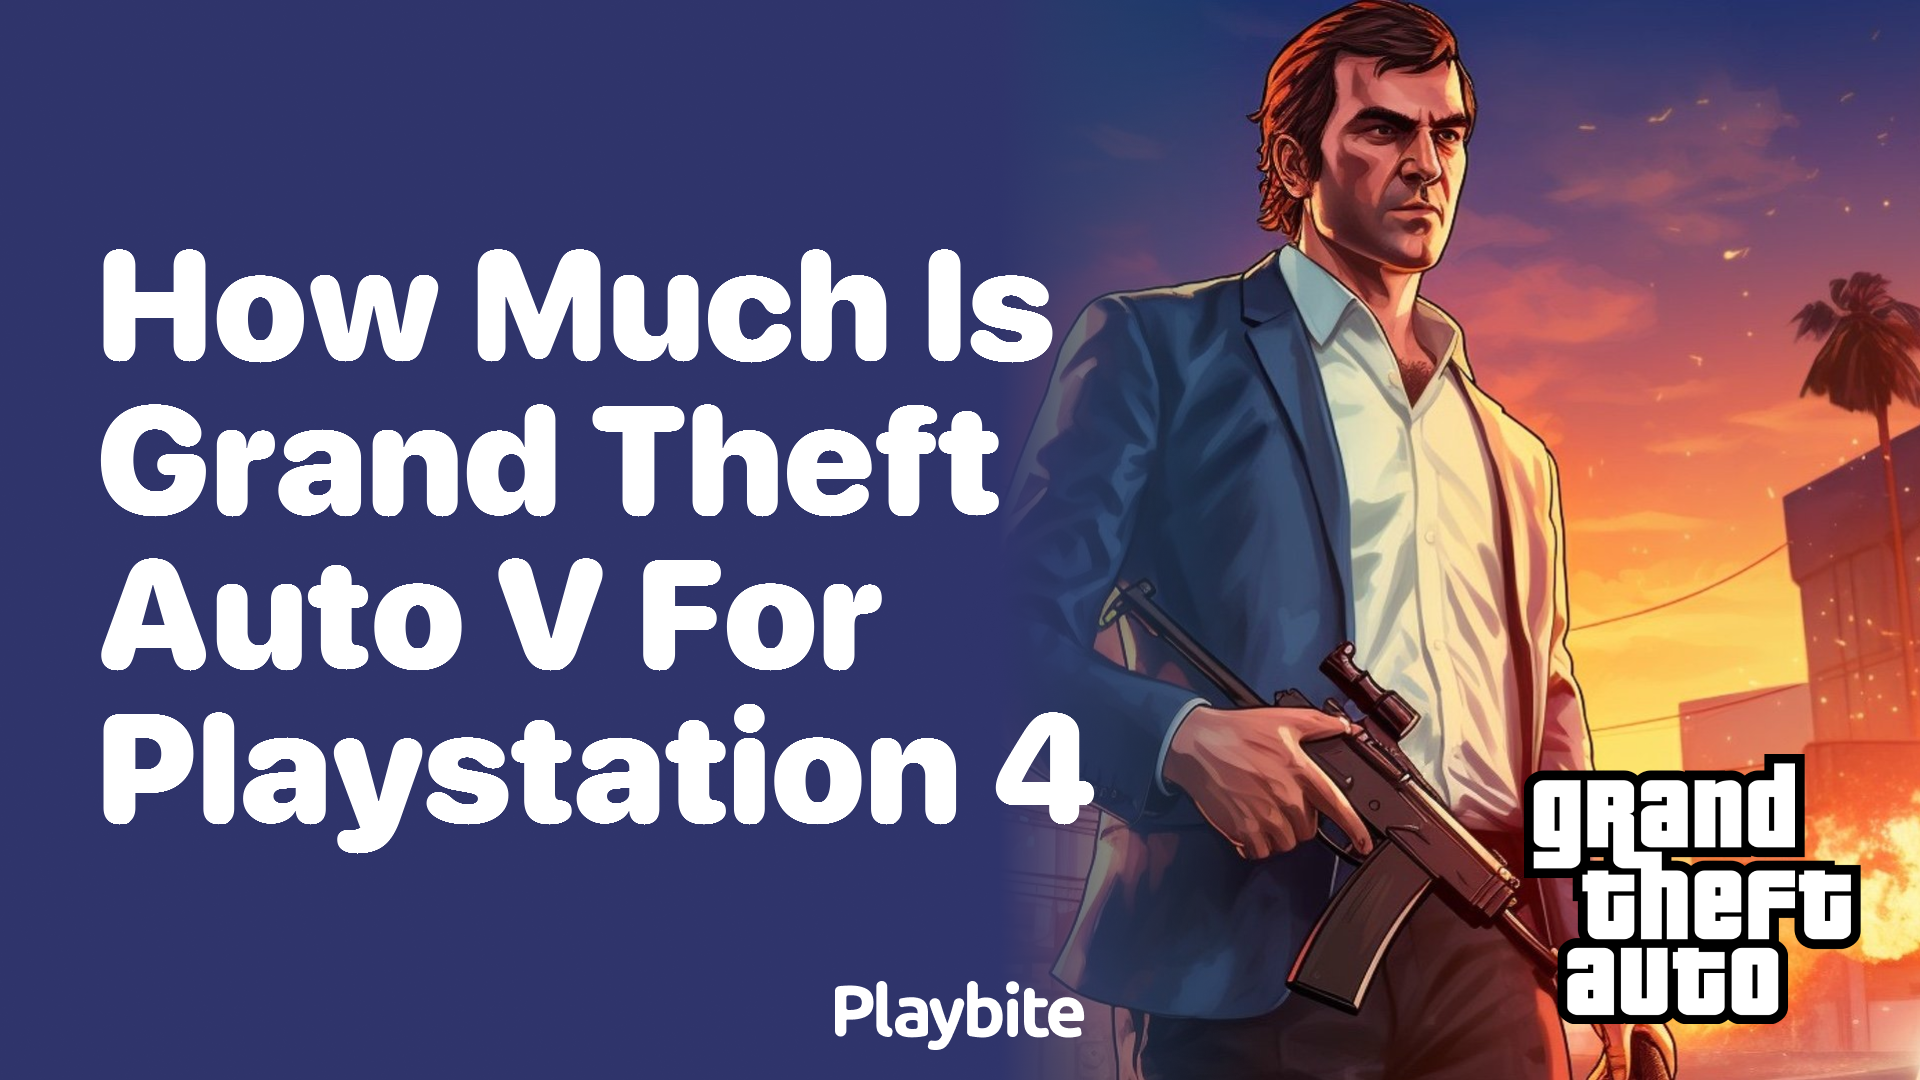 How much is Grand Theft Auto V for PlayStation 4?